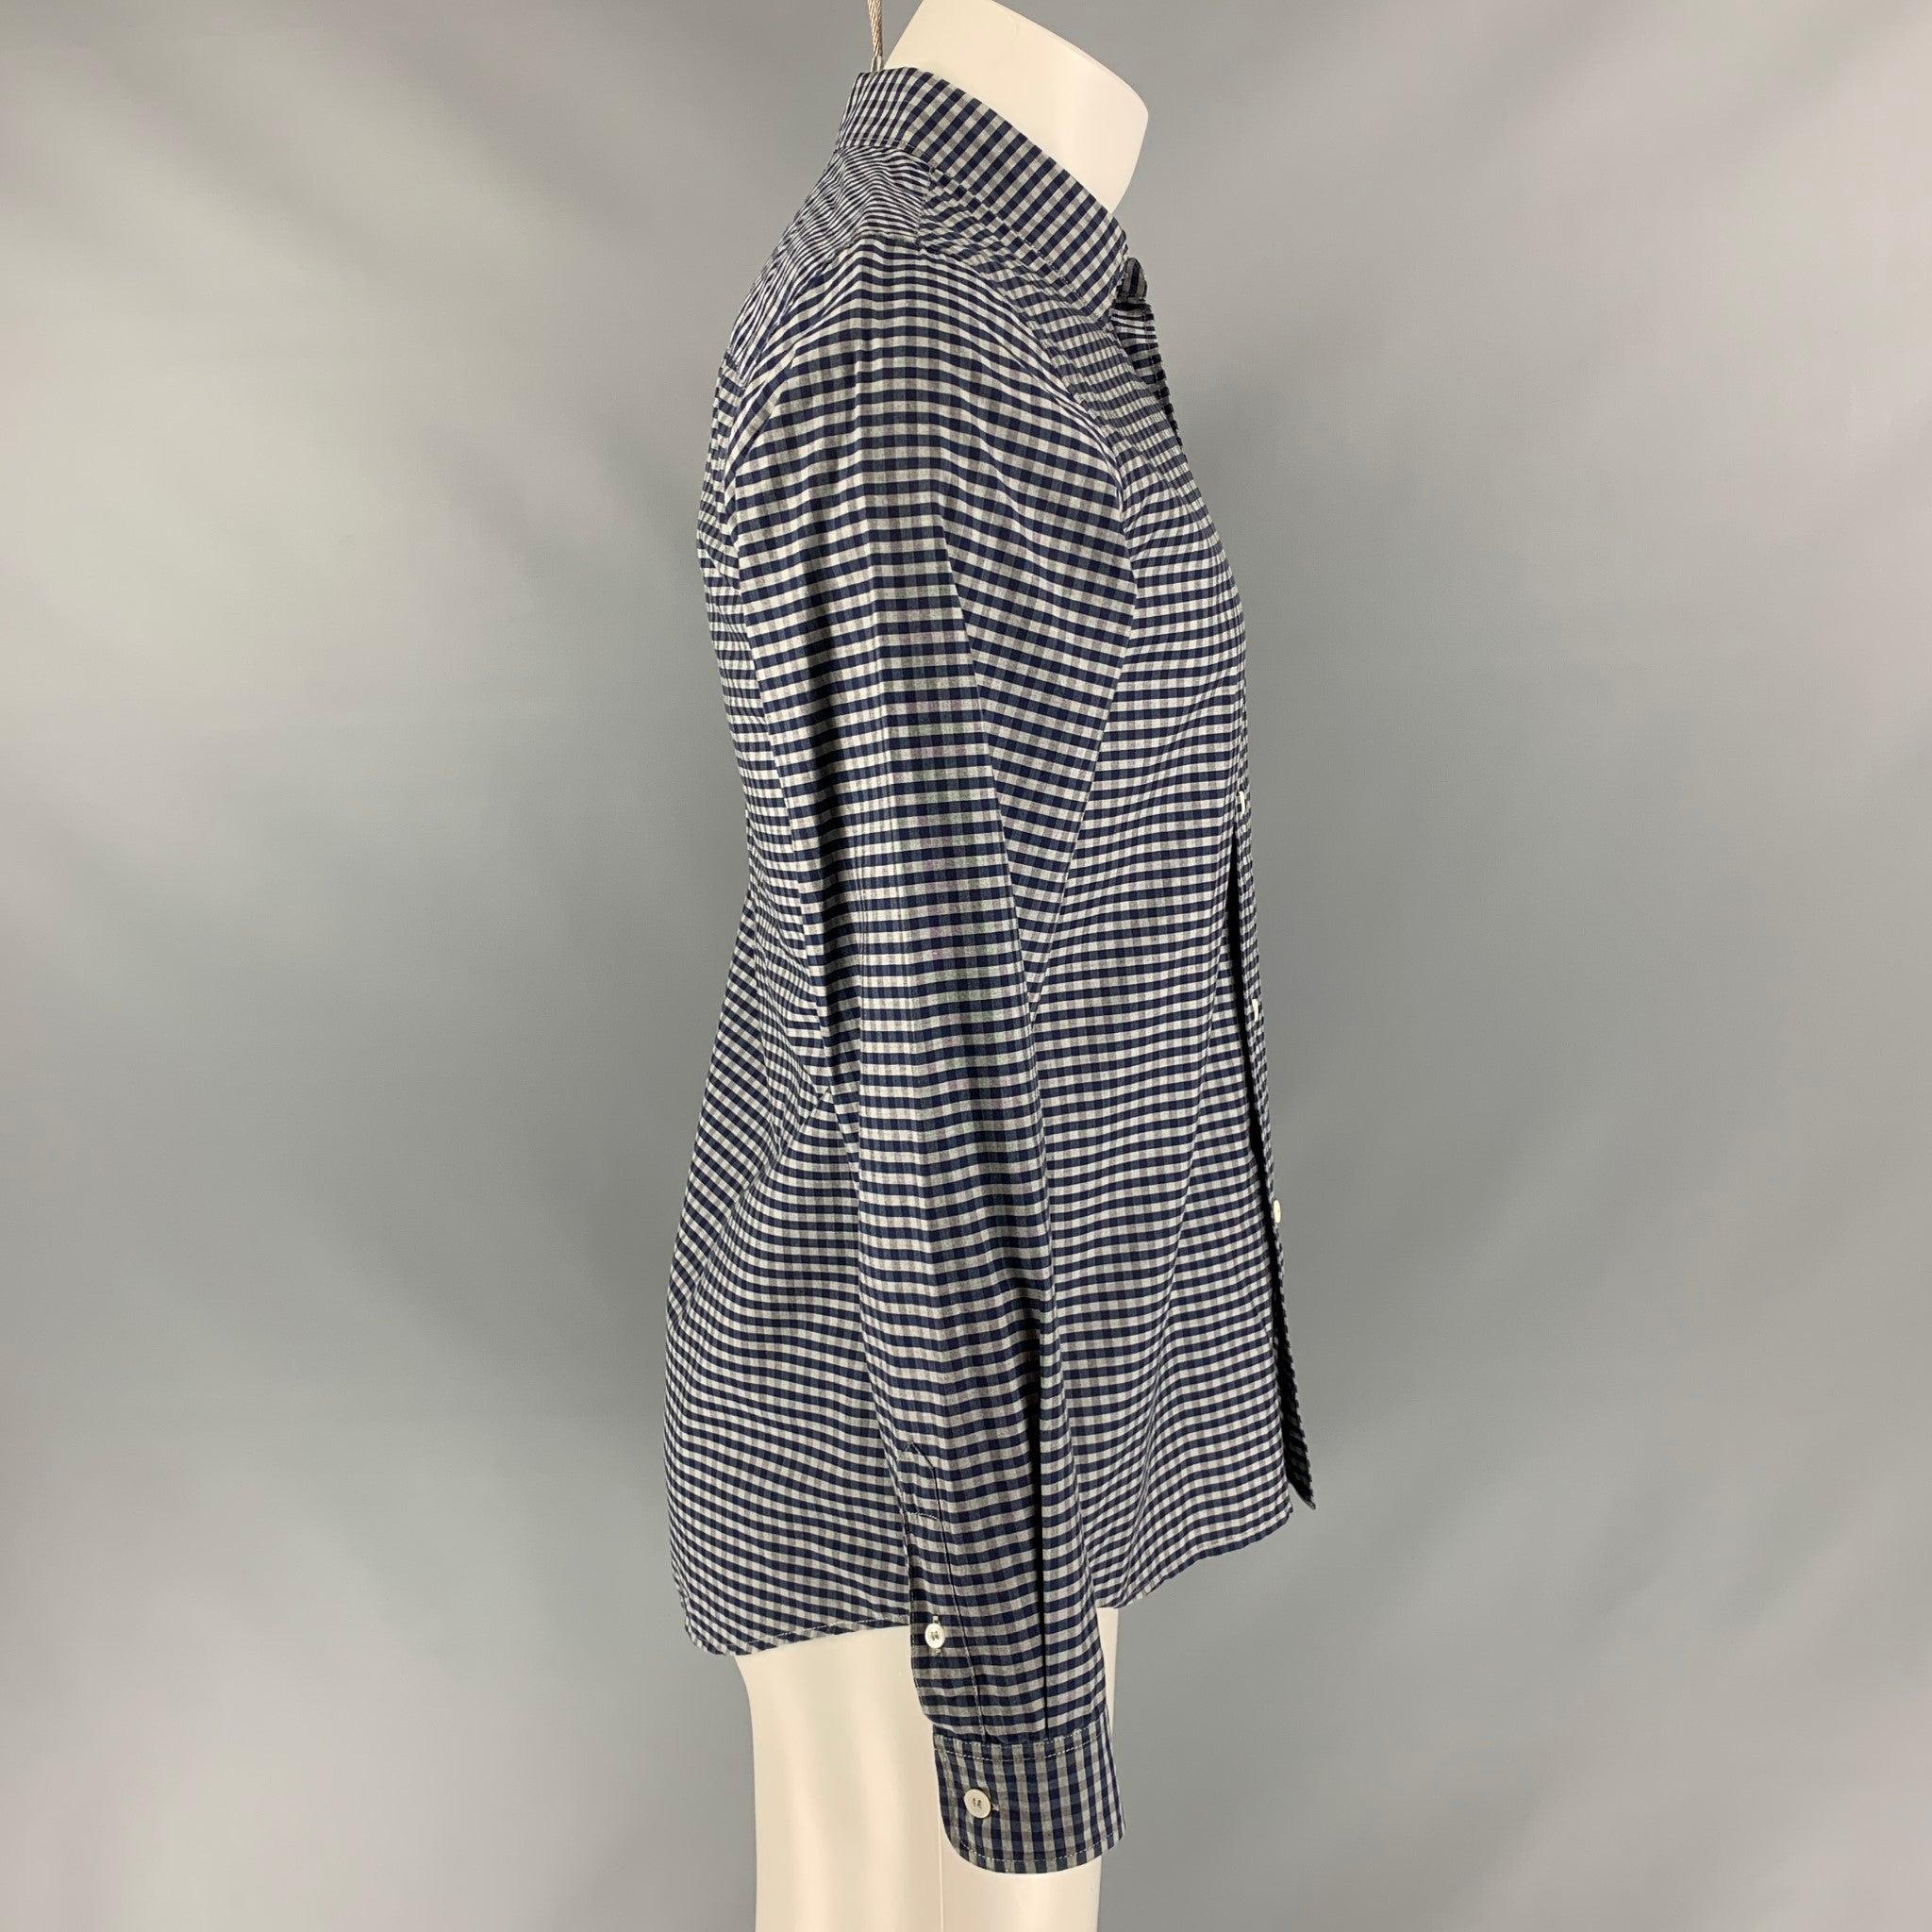 A.P.C. long sleeve shirt comes in blue and grey checkered cotton featuring a straight collar, buttoned closure and one button round cuff. Made in Tunisia.Excellent Pre-Owned Condition. 

Marked:   S 

Measurements: 
 
Shoulder: 17 inches Chest: 40